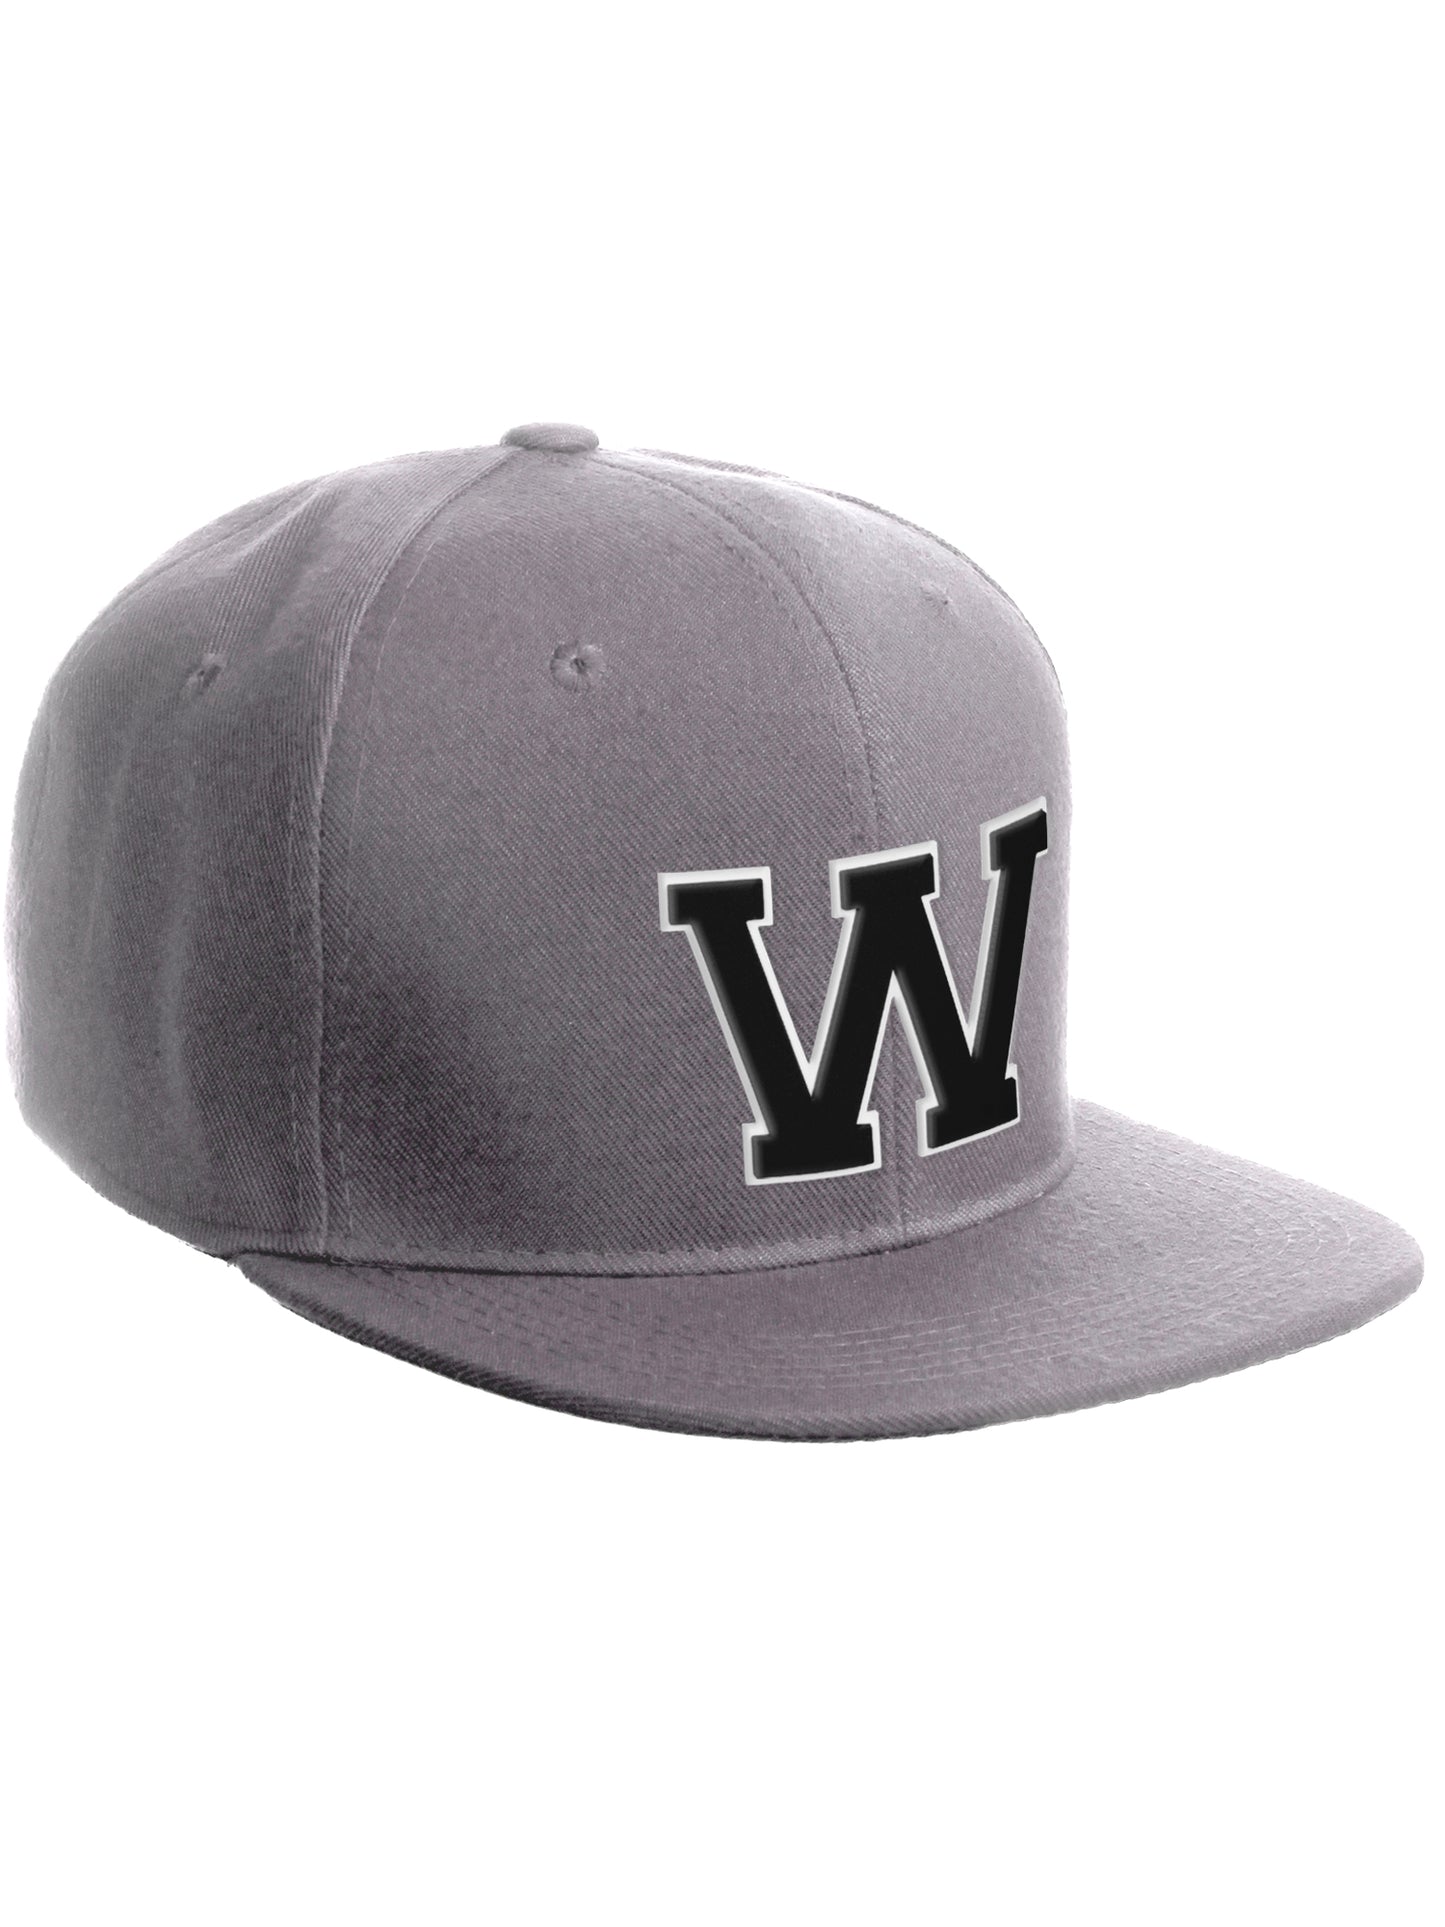 Classic Snapback Hat Custom A to Z Initial Letters, Light Grey Cap White Black